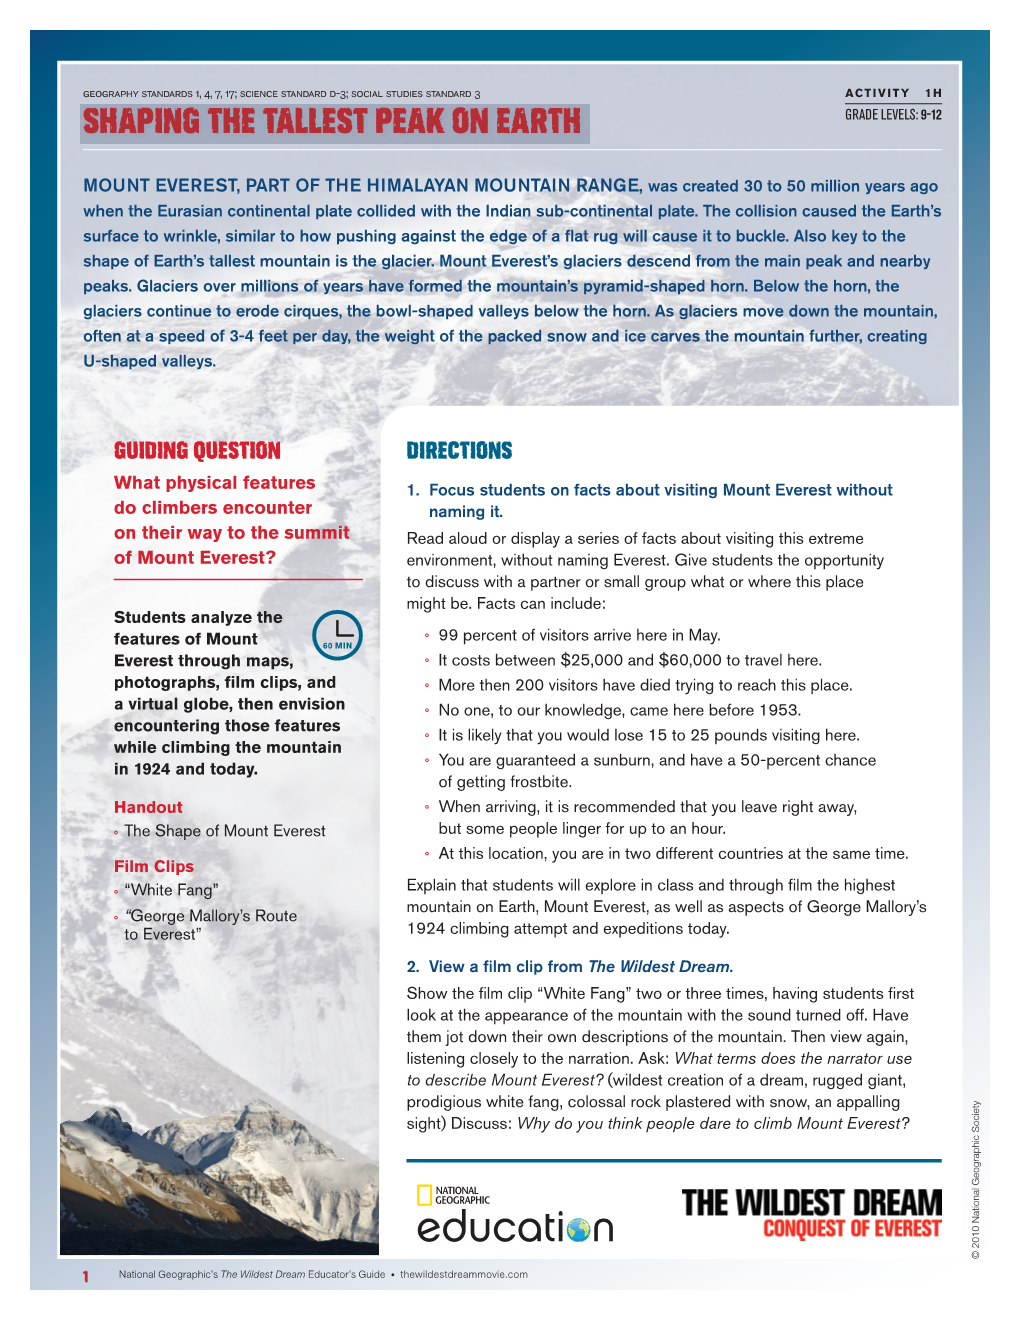 Shaping the Tallest Peak on Earth Grade Levels: 9-12